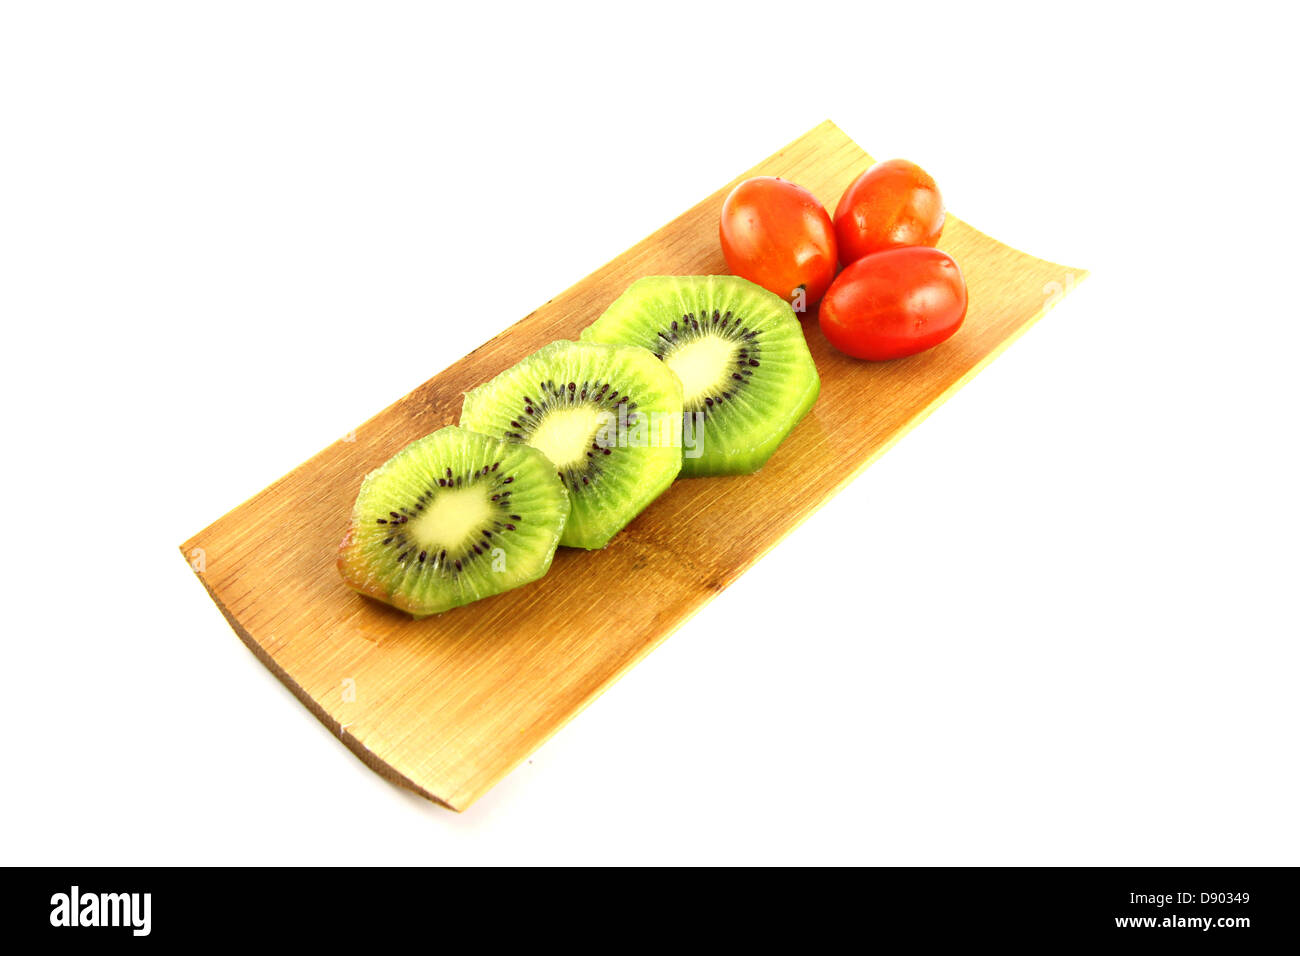 The Kiwifruit slices into pieces and three Tomato on the Bamboo dish. Stock Photo